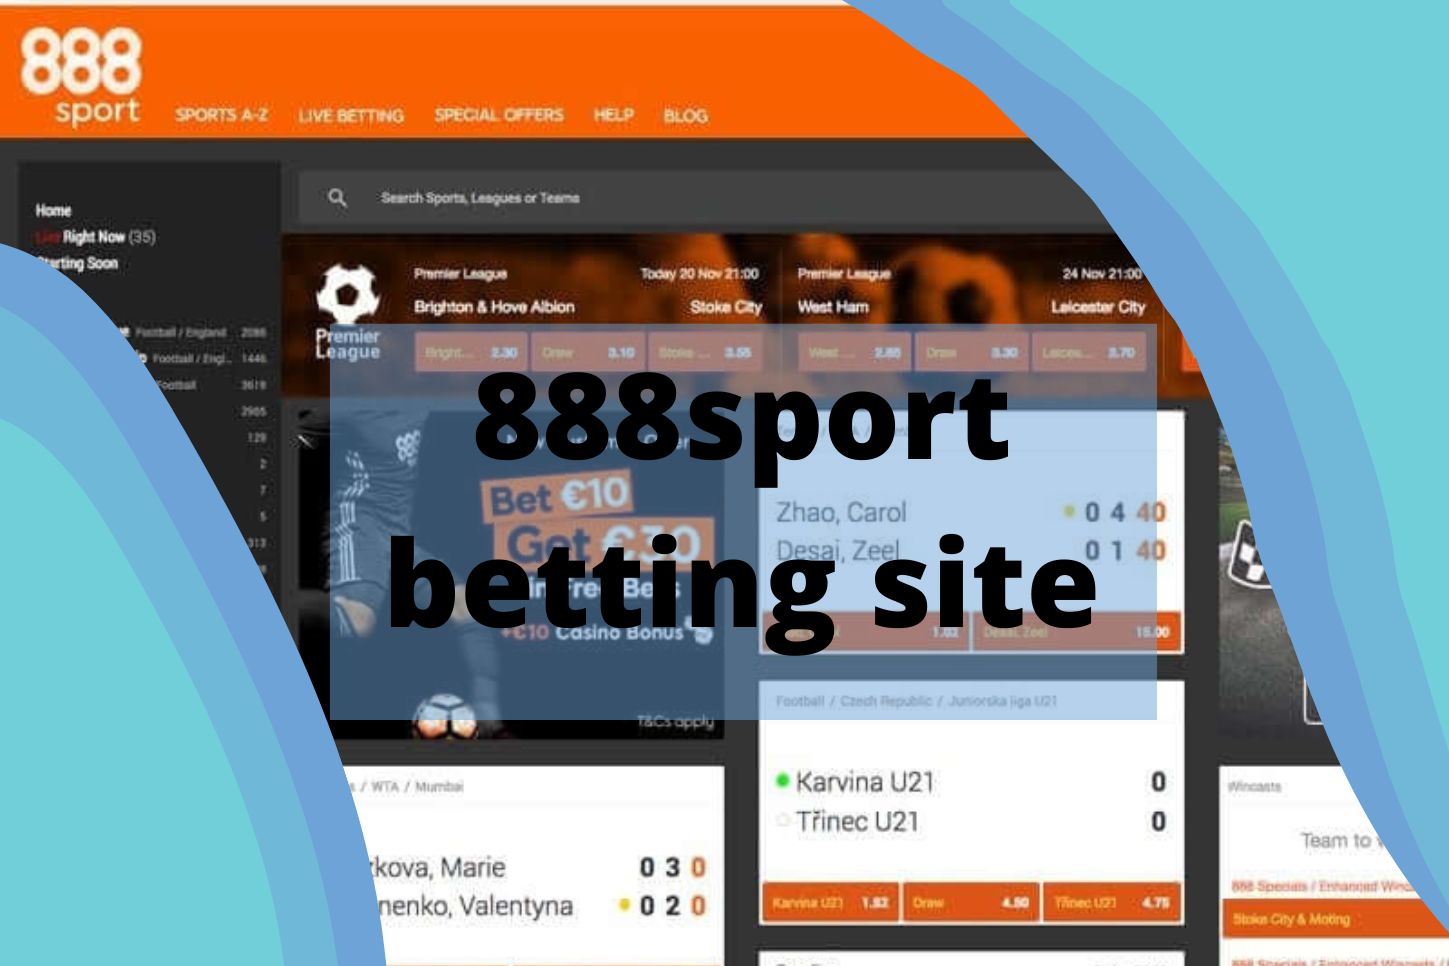 Bet on Your Favorite Events with the 888sport Betting Site